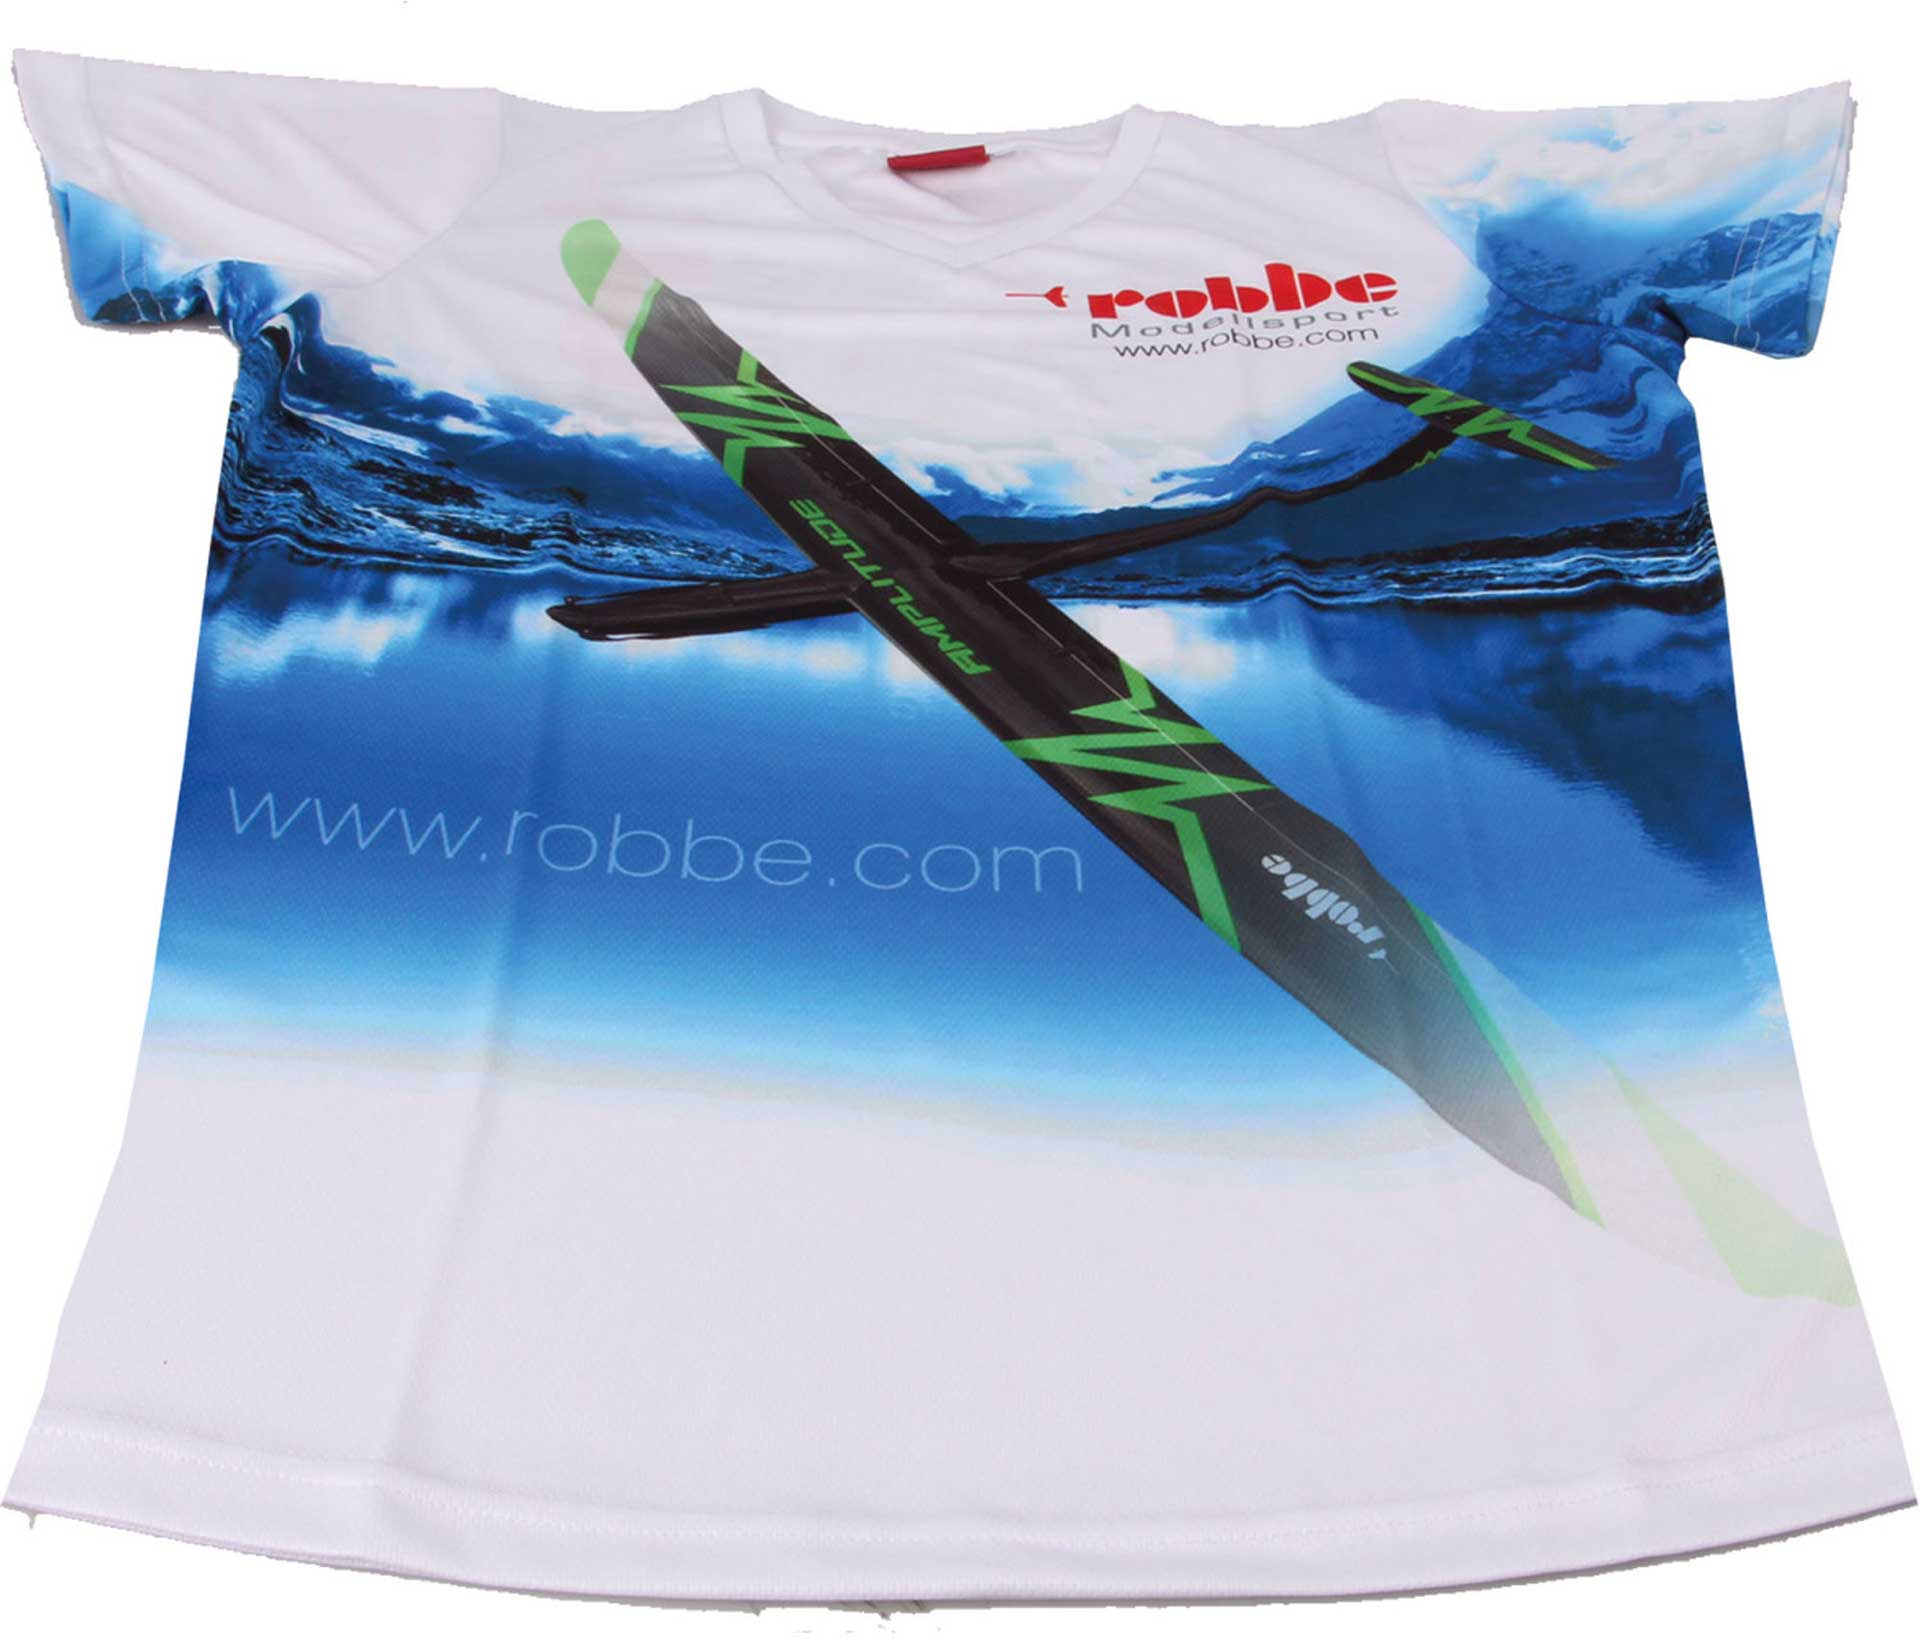 Robbe Modellsport T-SHIRT "AMPLITUDE" ROBBE TAILLE S